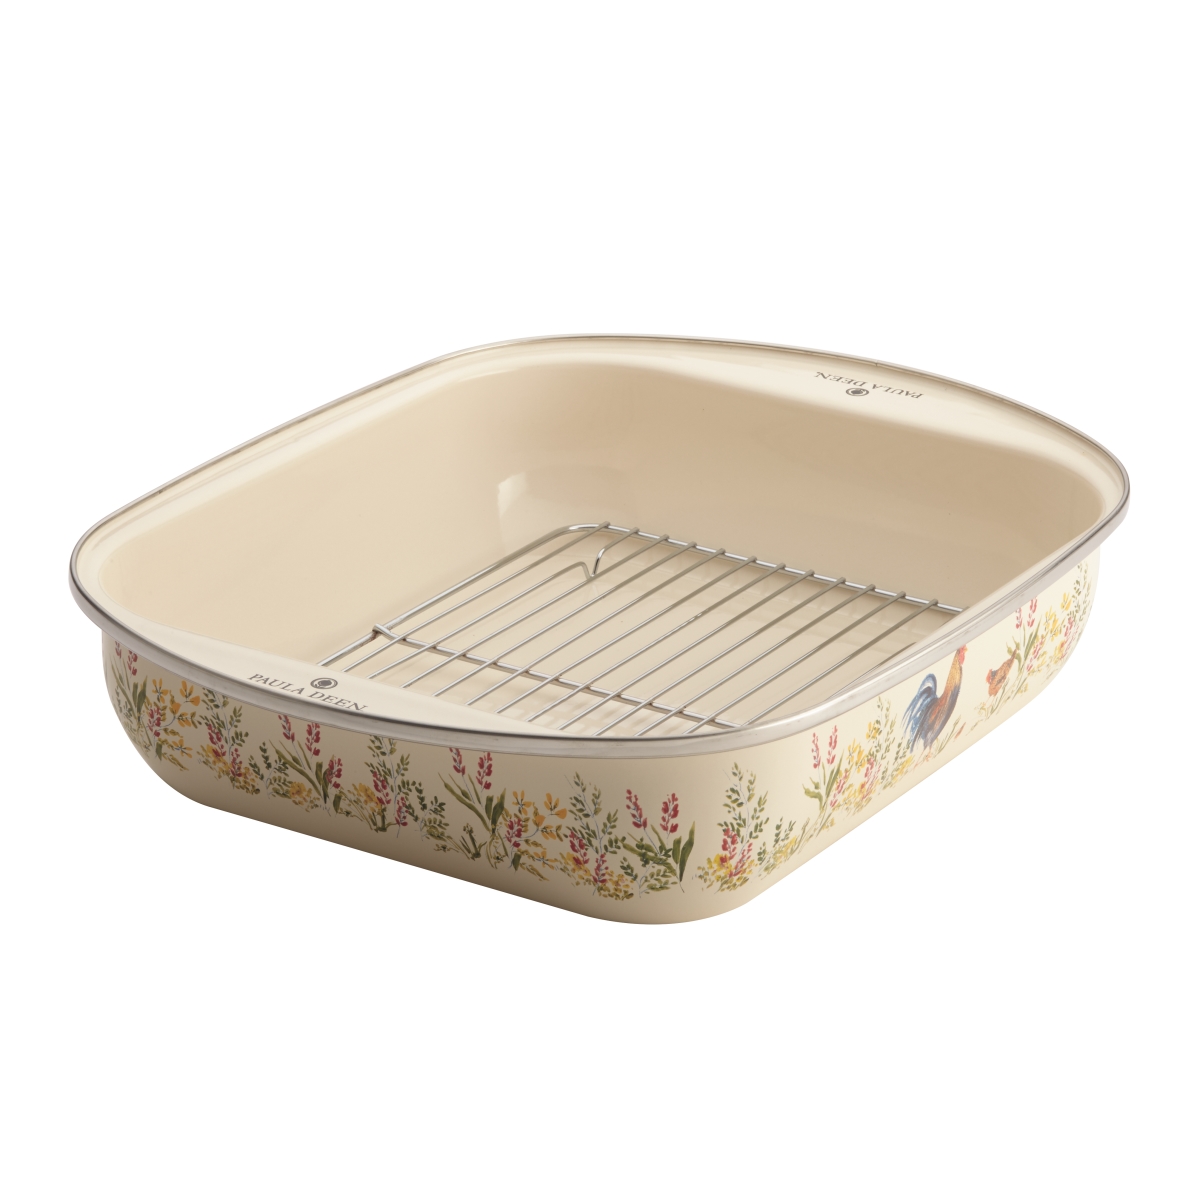 46811 Enamel-on-steel Roaster With Removable Chrome Rack, Garden Rooster - 14 X 12 In.